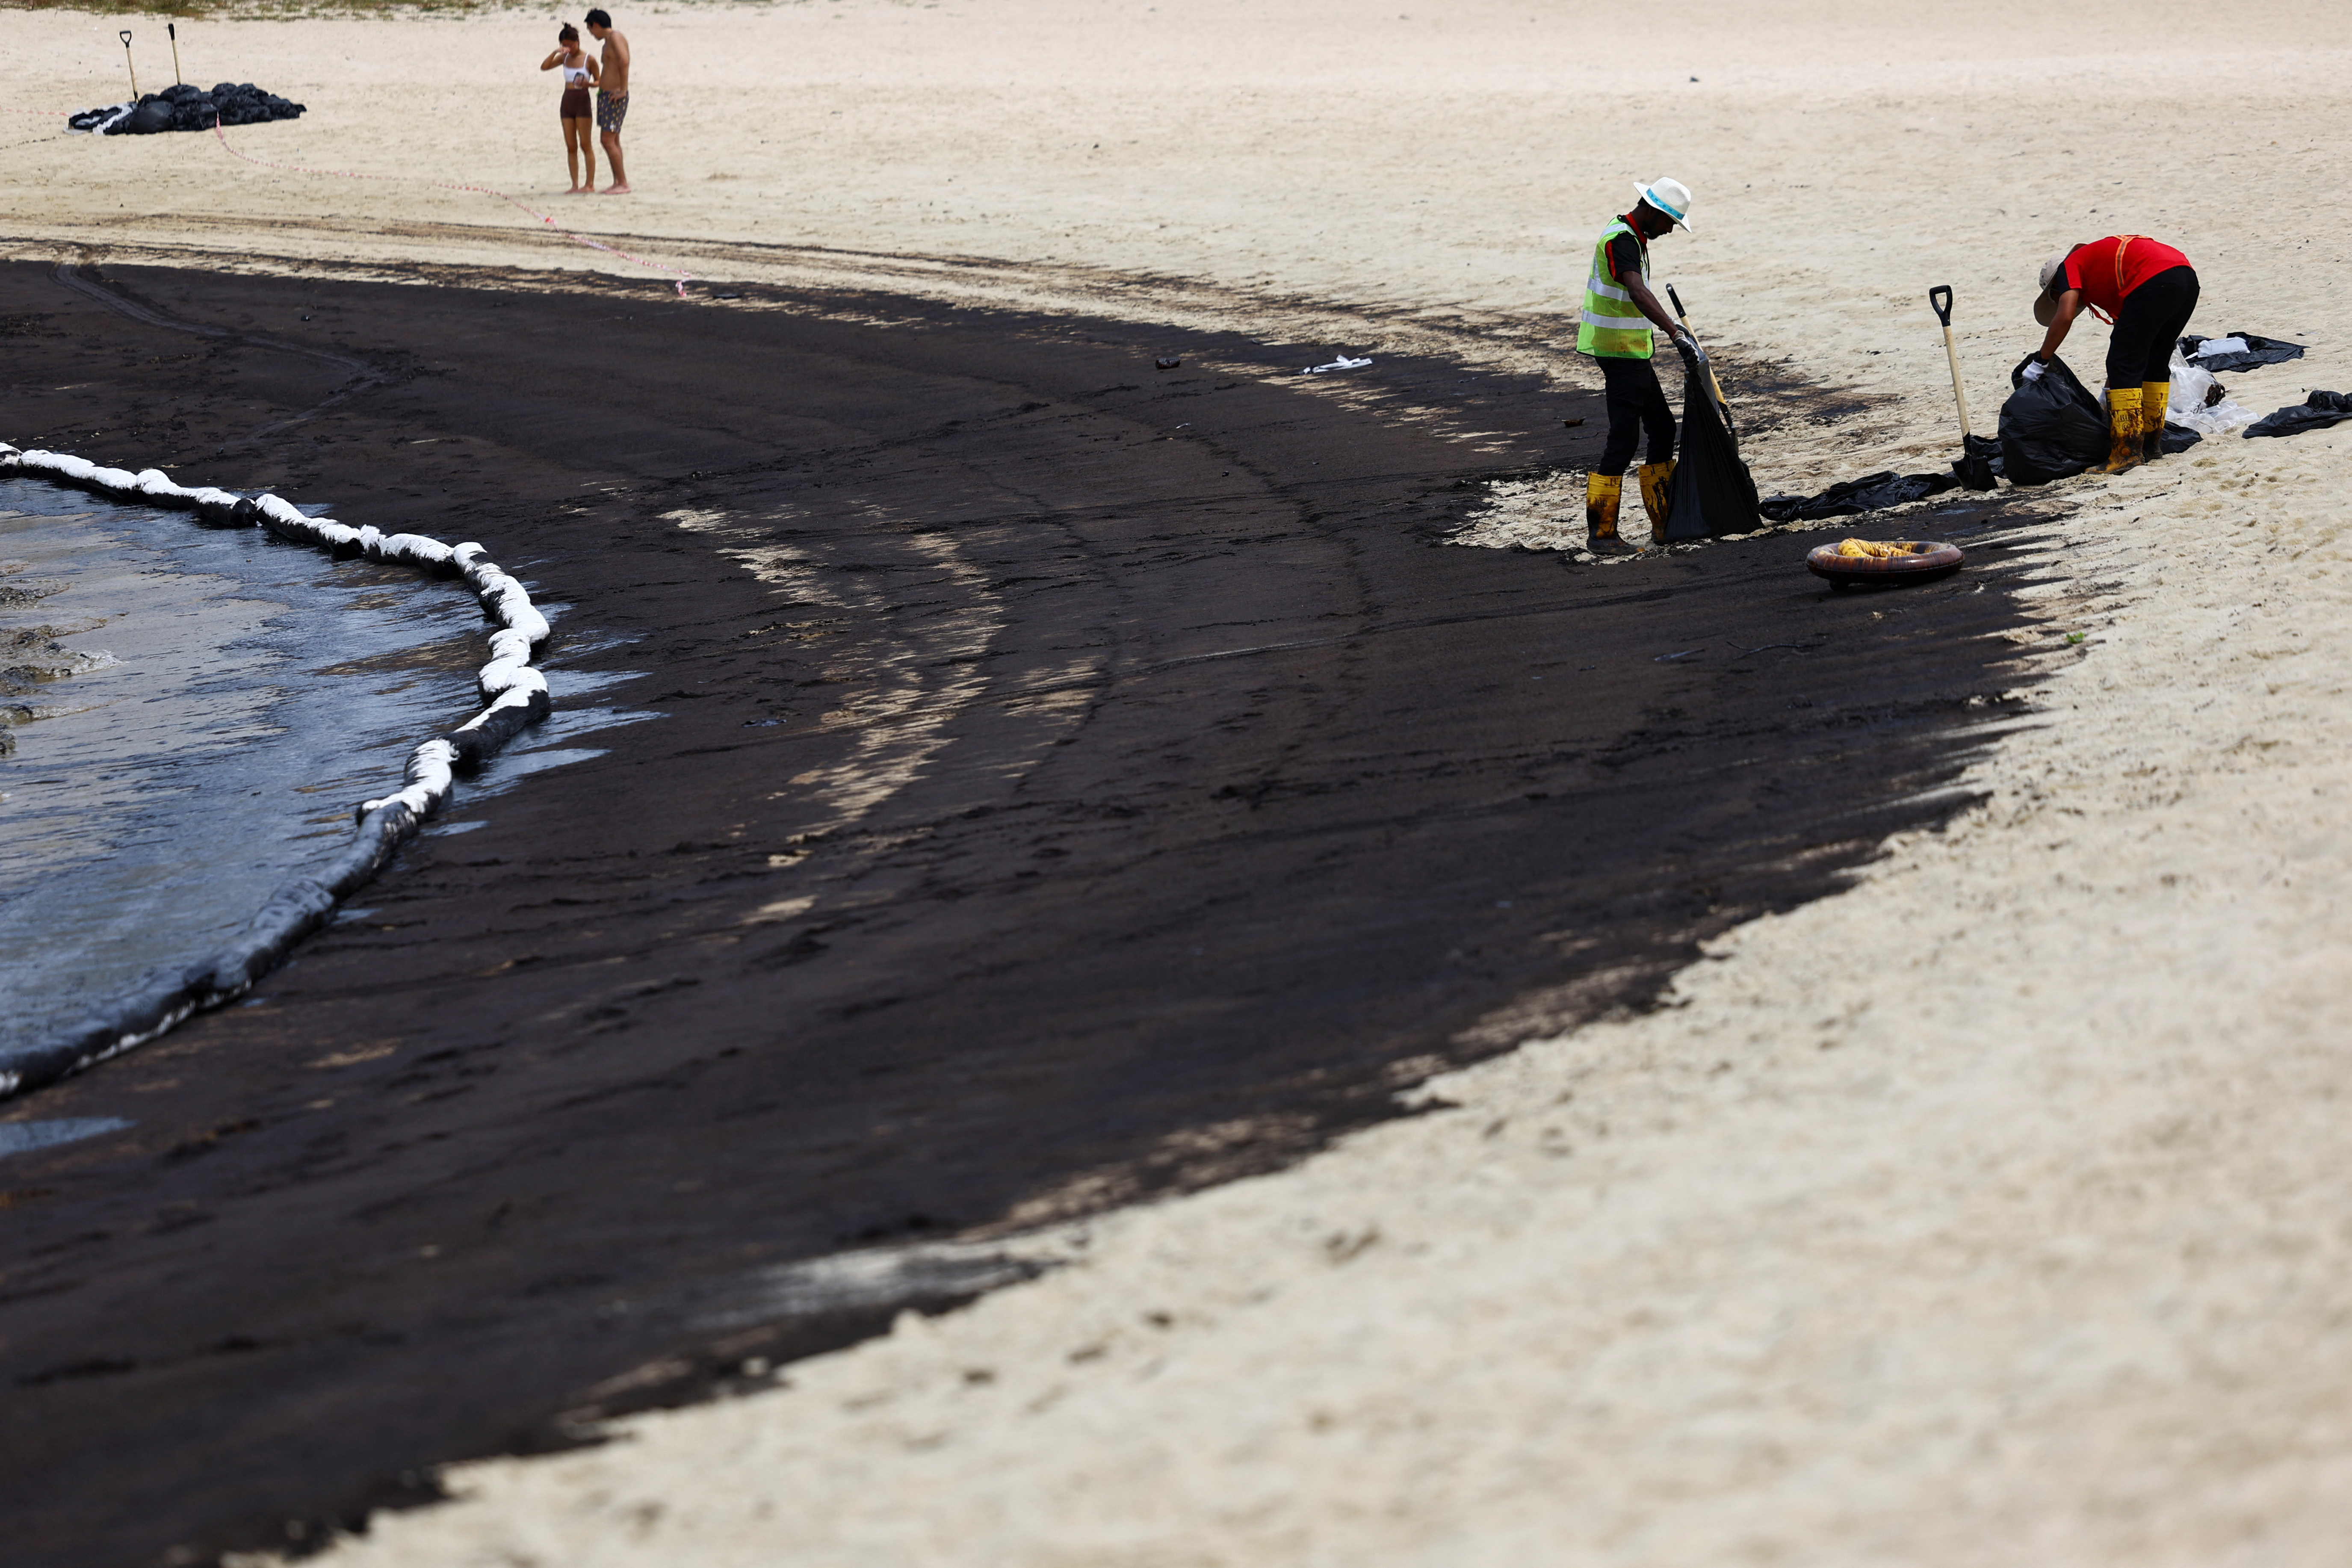 Workers clean up the beach following an oil slick at Tanjong Beach in Sentosa, Singapore